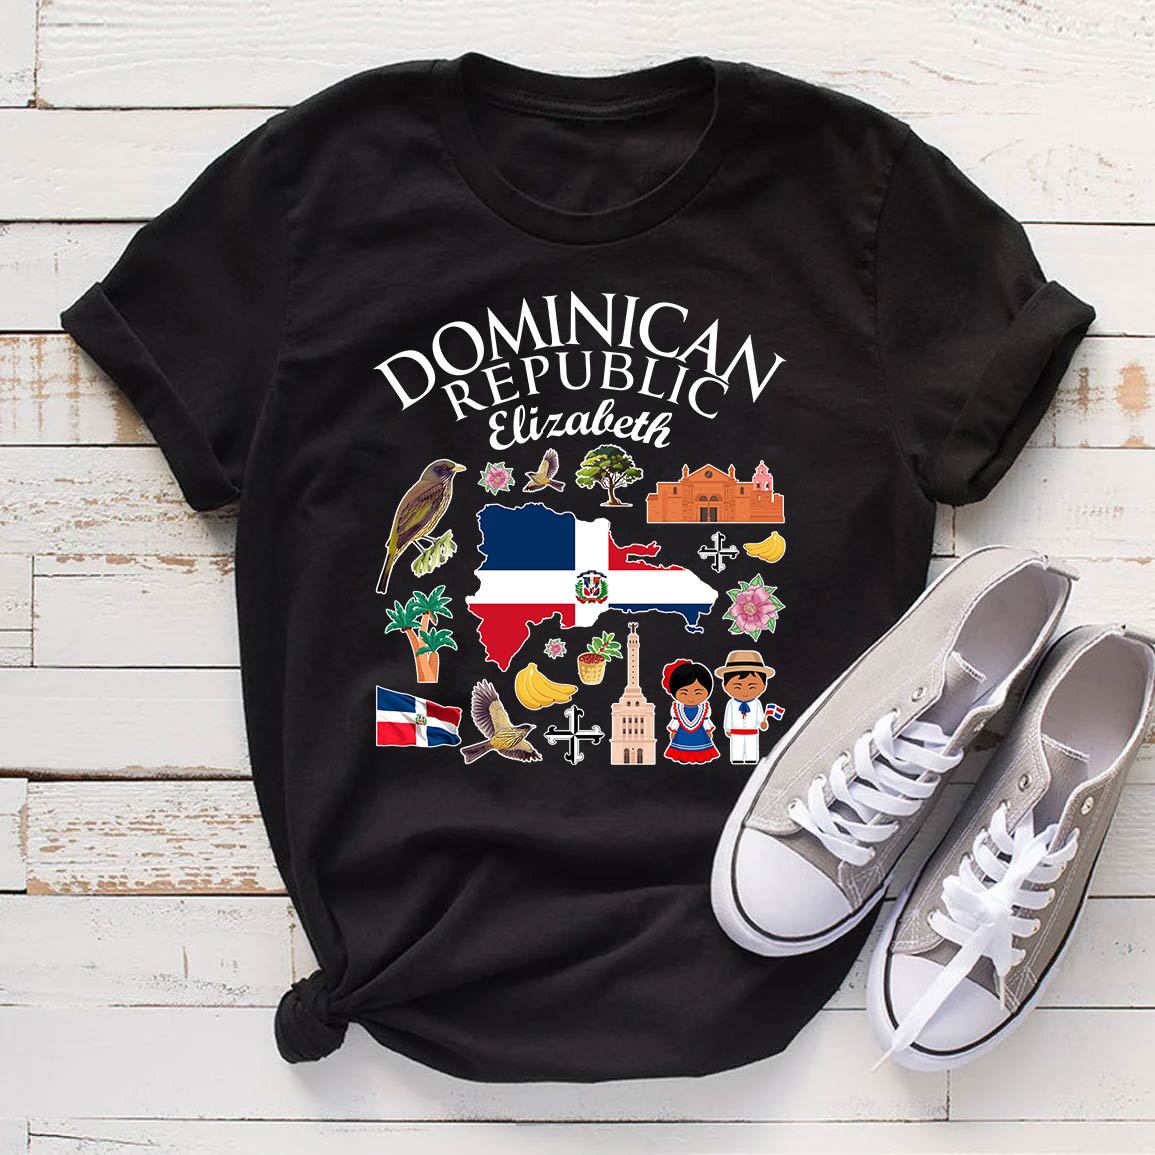 Customized Dominican Republic T-shirt With Symbols And Name